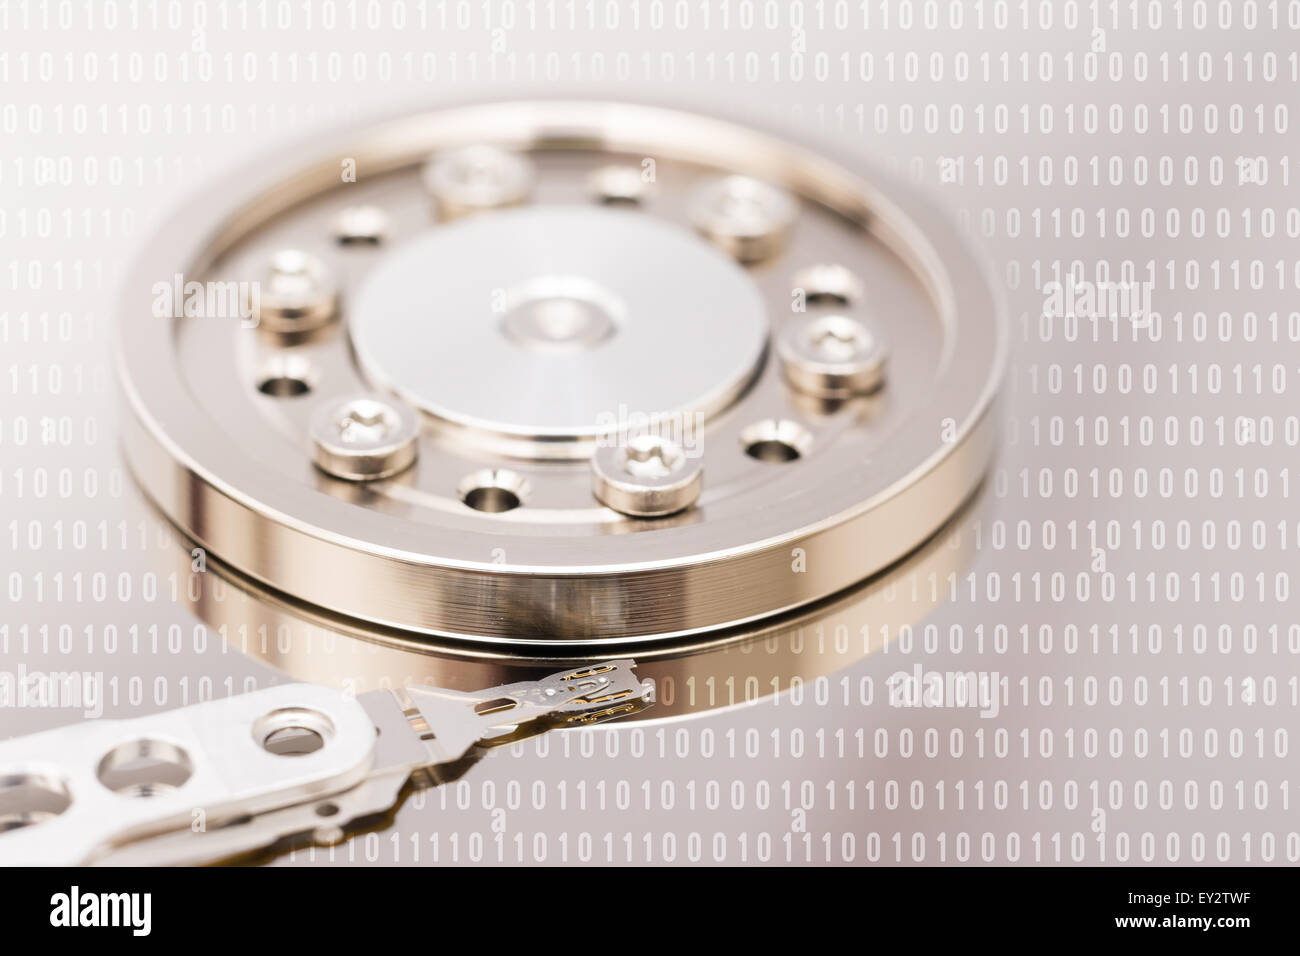 Computer Hard Disk Drive Internals And Binary Number Code Stock Photo